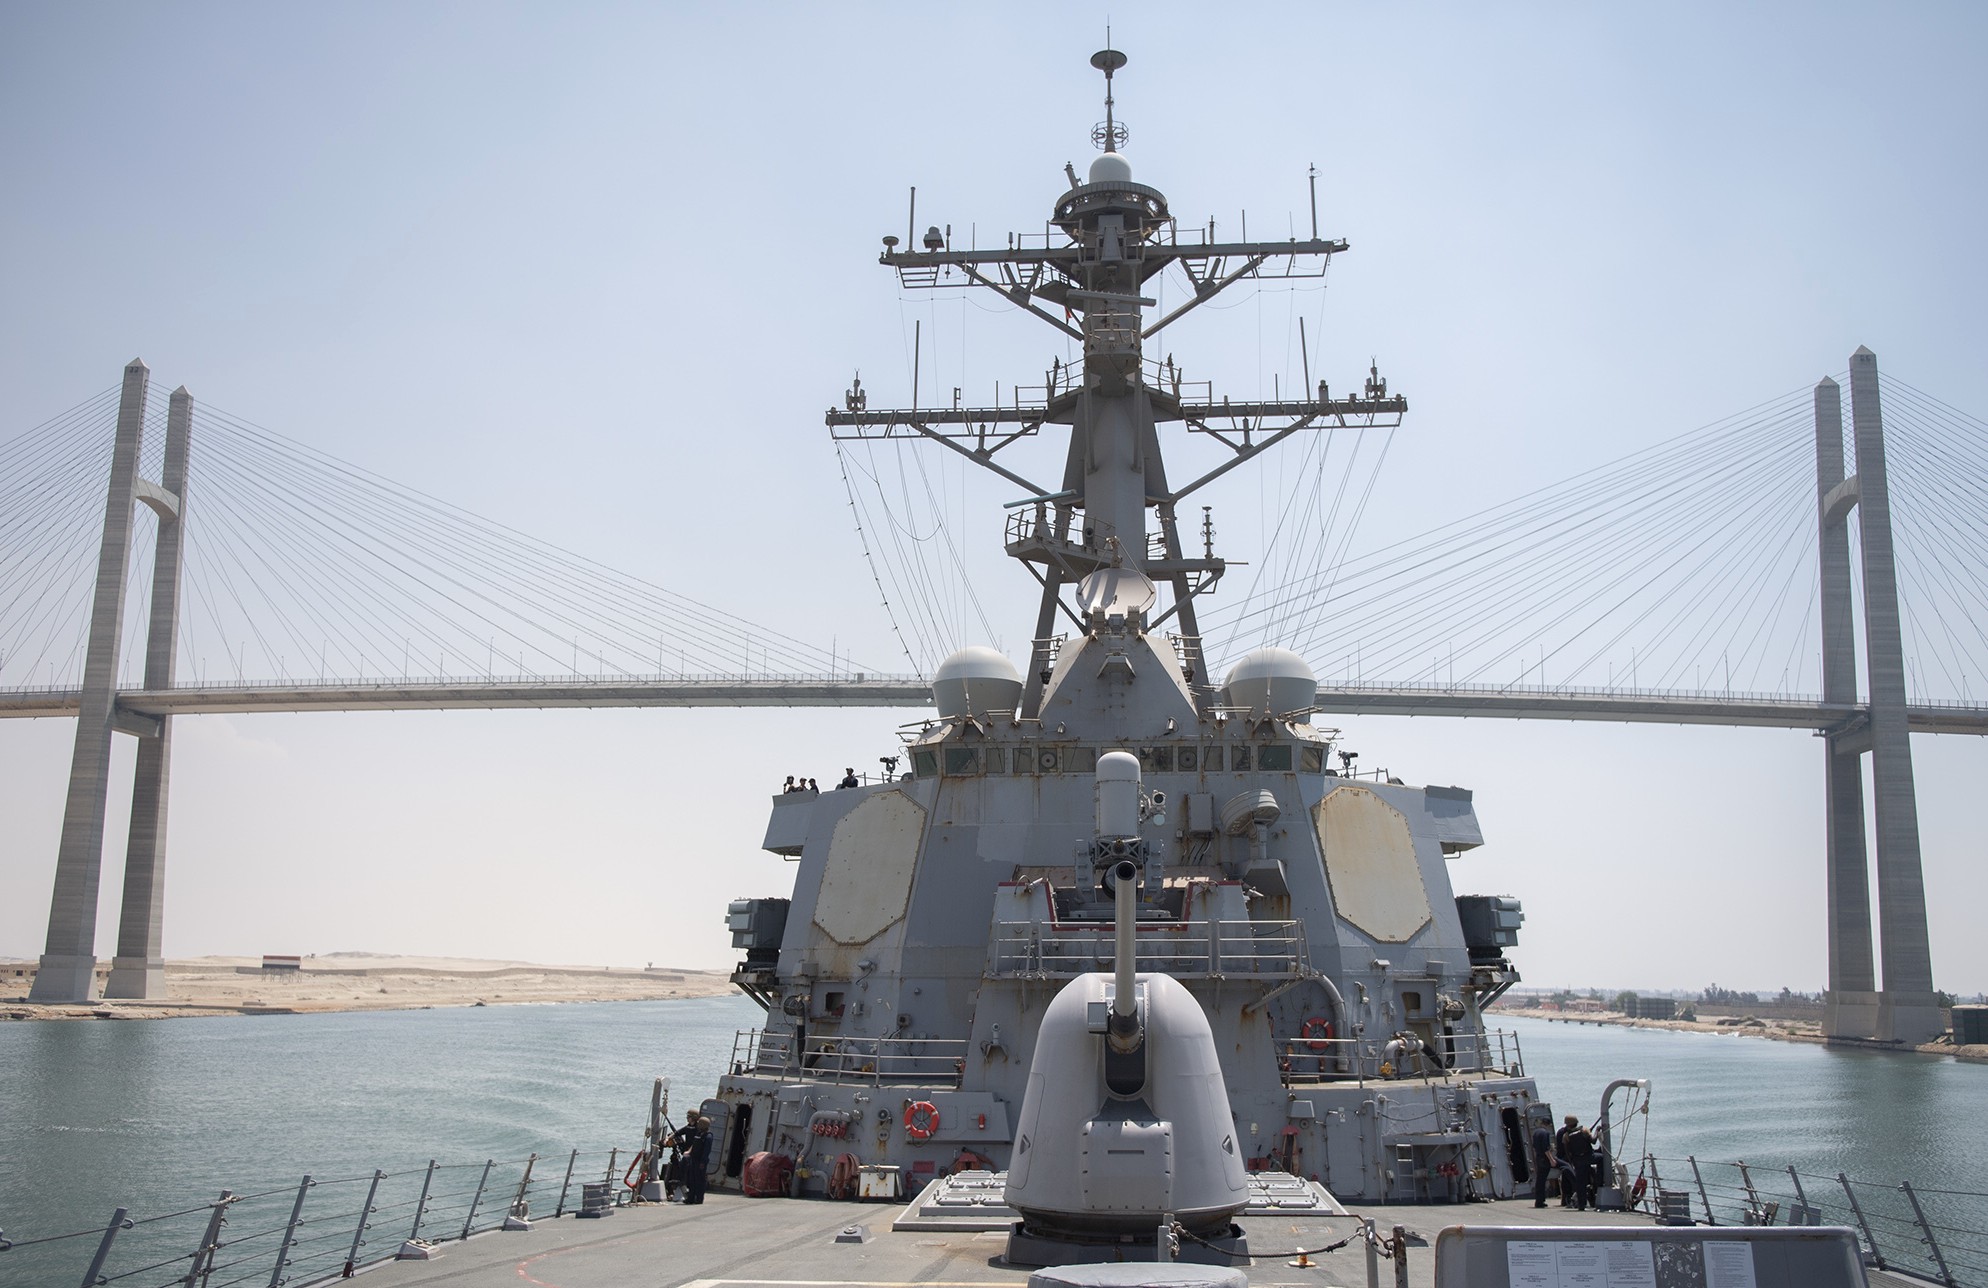 ddg-74 uss mcfaul guided missile destroyer arleigh burke class aegis us navy suez canal 07